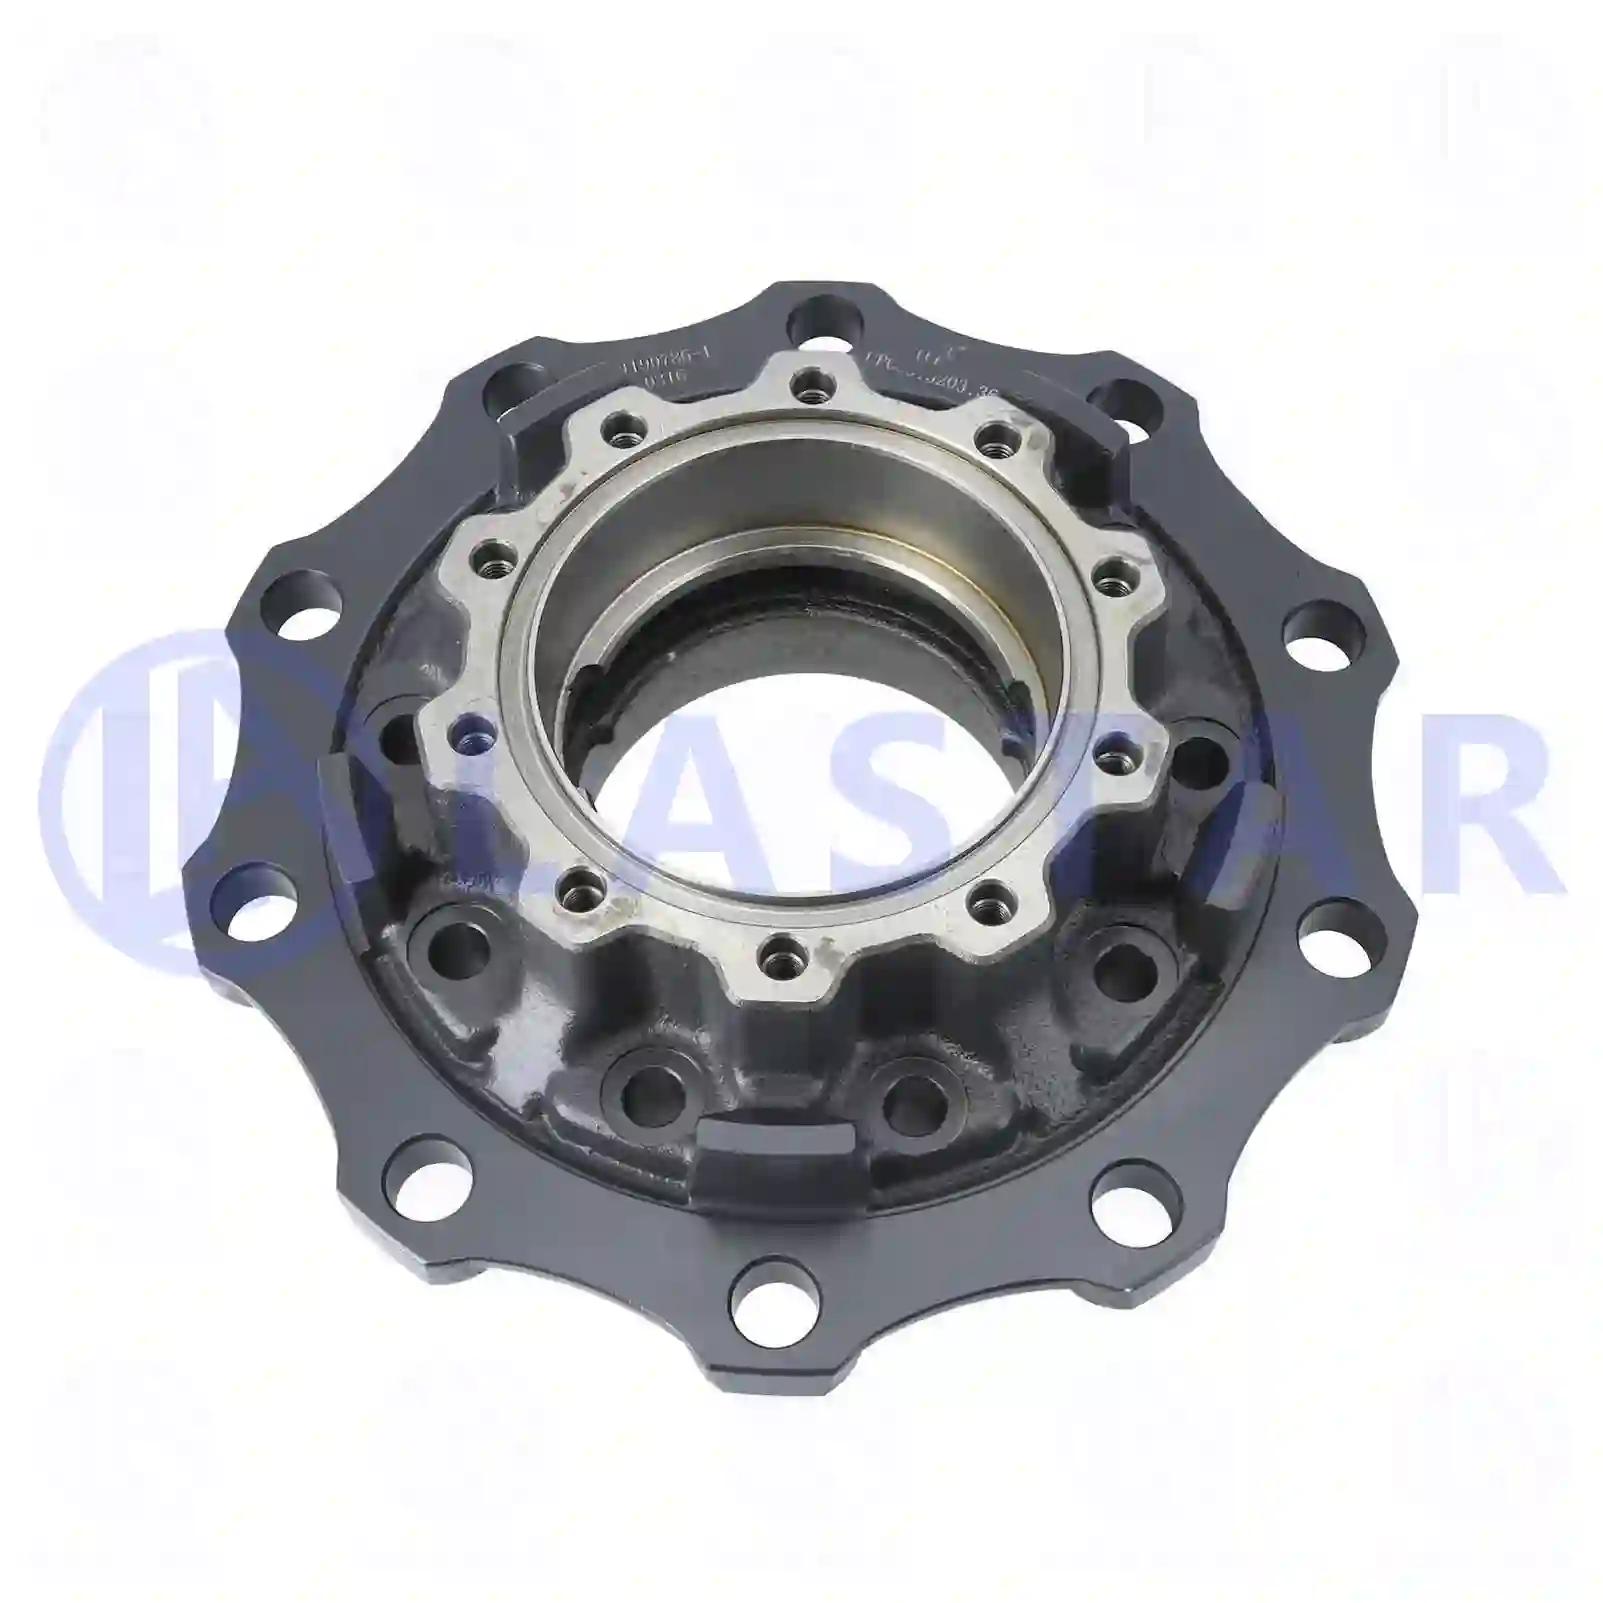 Wheel hub, without bearings, 77726728, 1822615, 2290525, 2603319, , , ||  77726728 Lastar Spare Part | Truck Spare Parts, Auotomotive Spare Parts Wheel hub, without bearings, 77726728, 1822615, 2290525, 2603319, , , ||  77726728 Lastar Spare Part | Truck Spare Parts, Auotomotive Spare Parts